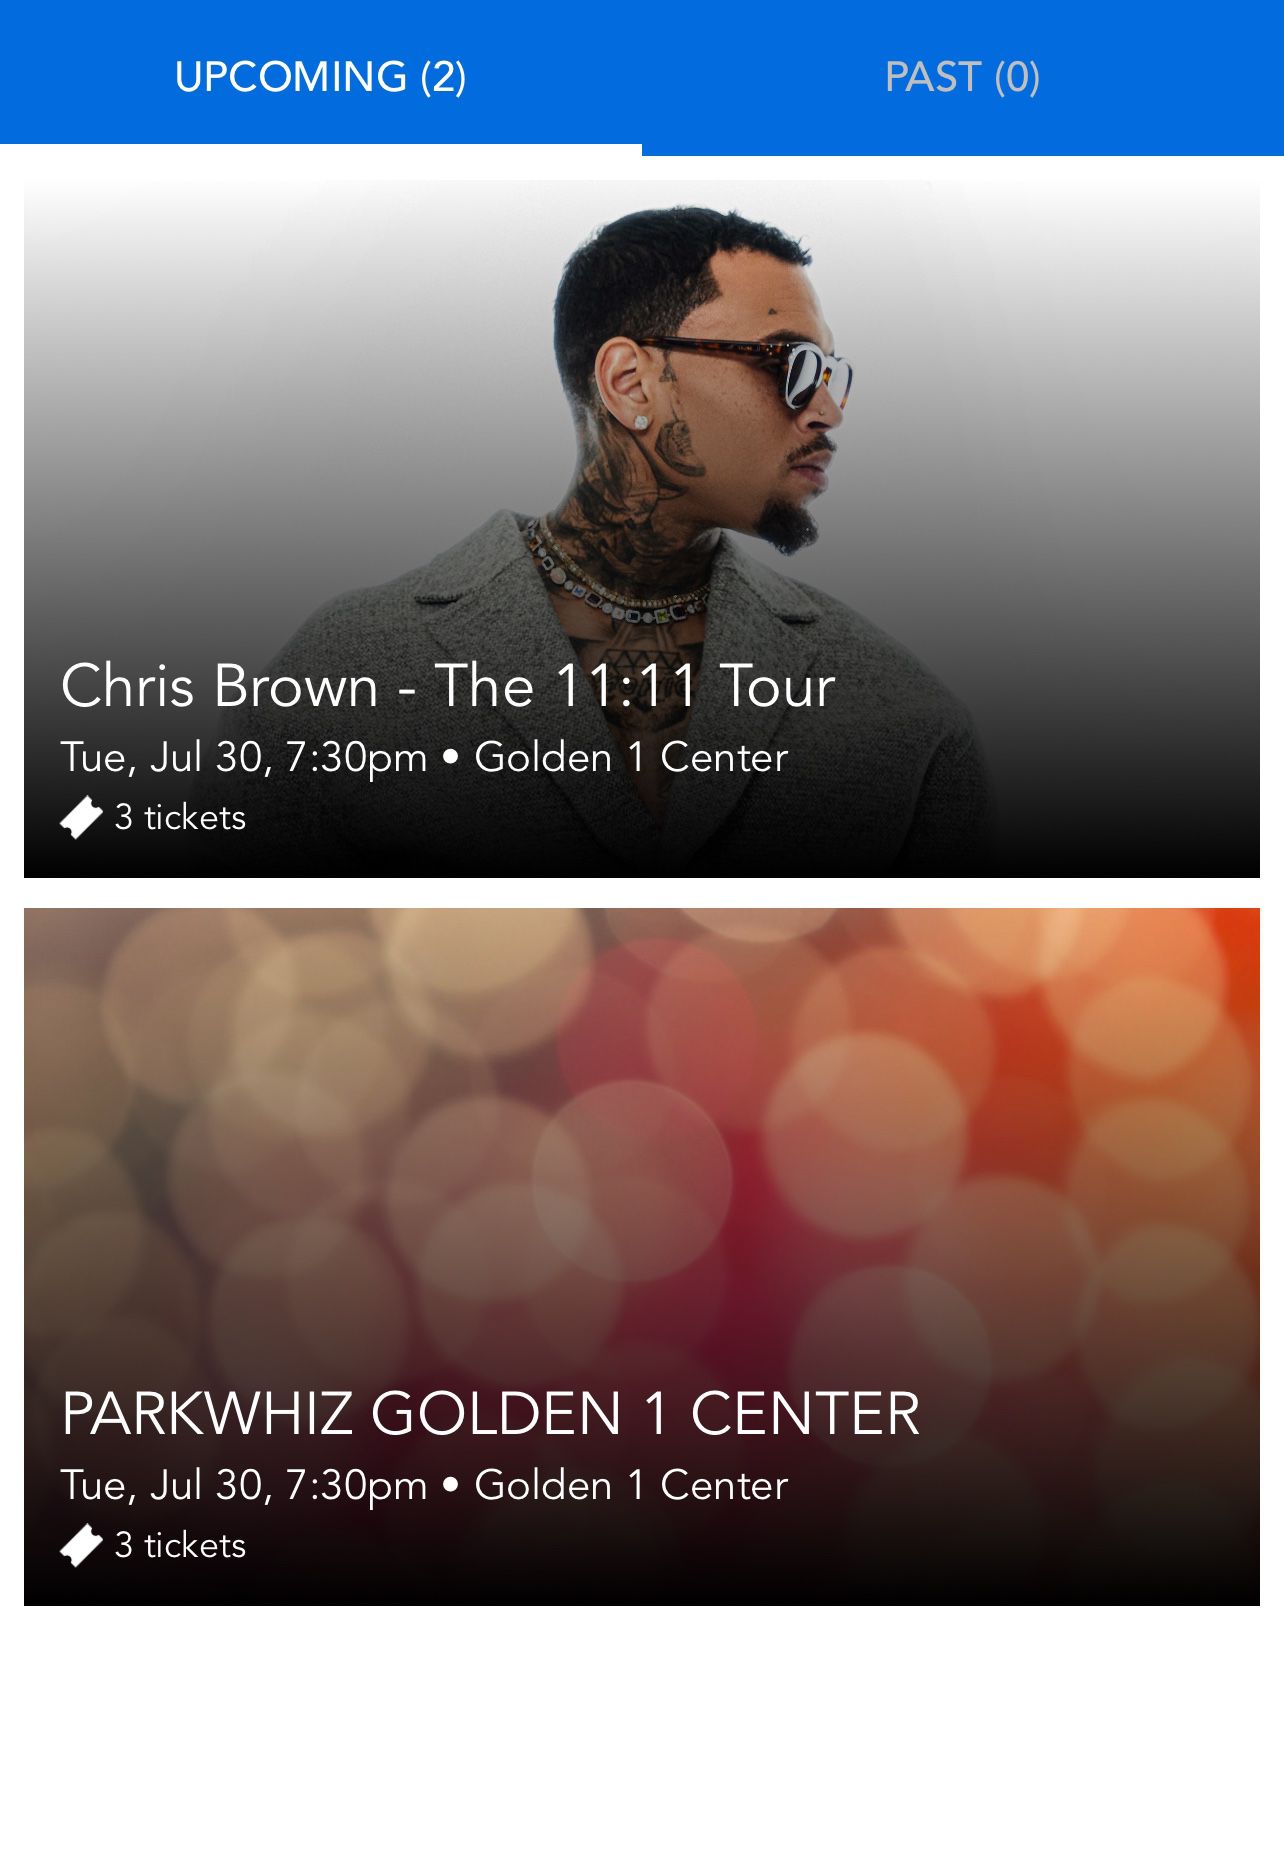 Chris Brown Tickets $800 Value Going For $600 